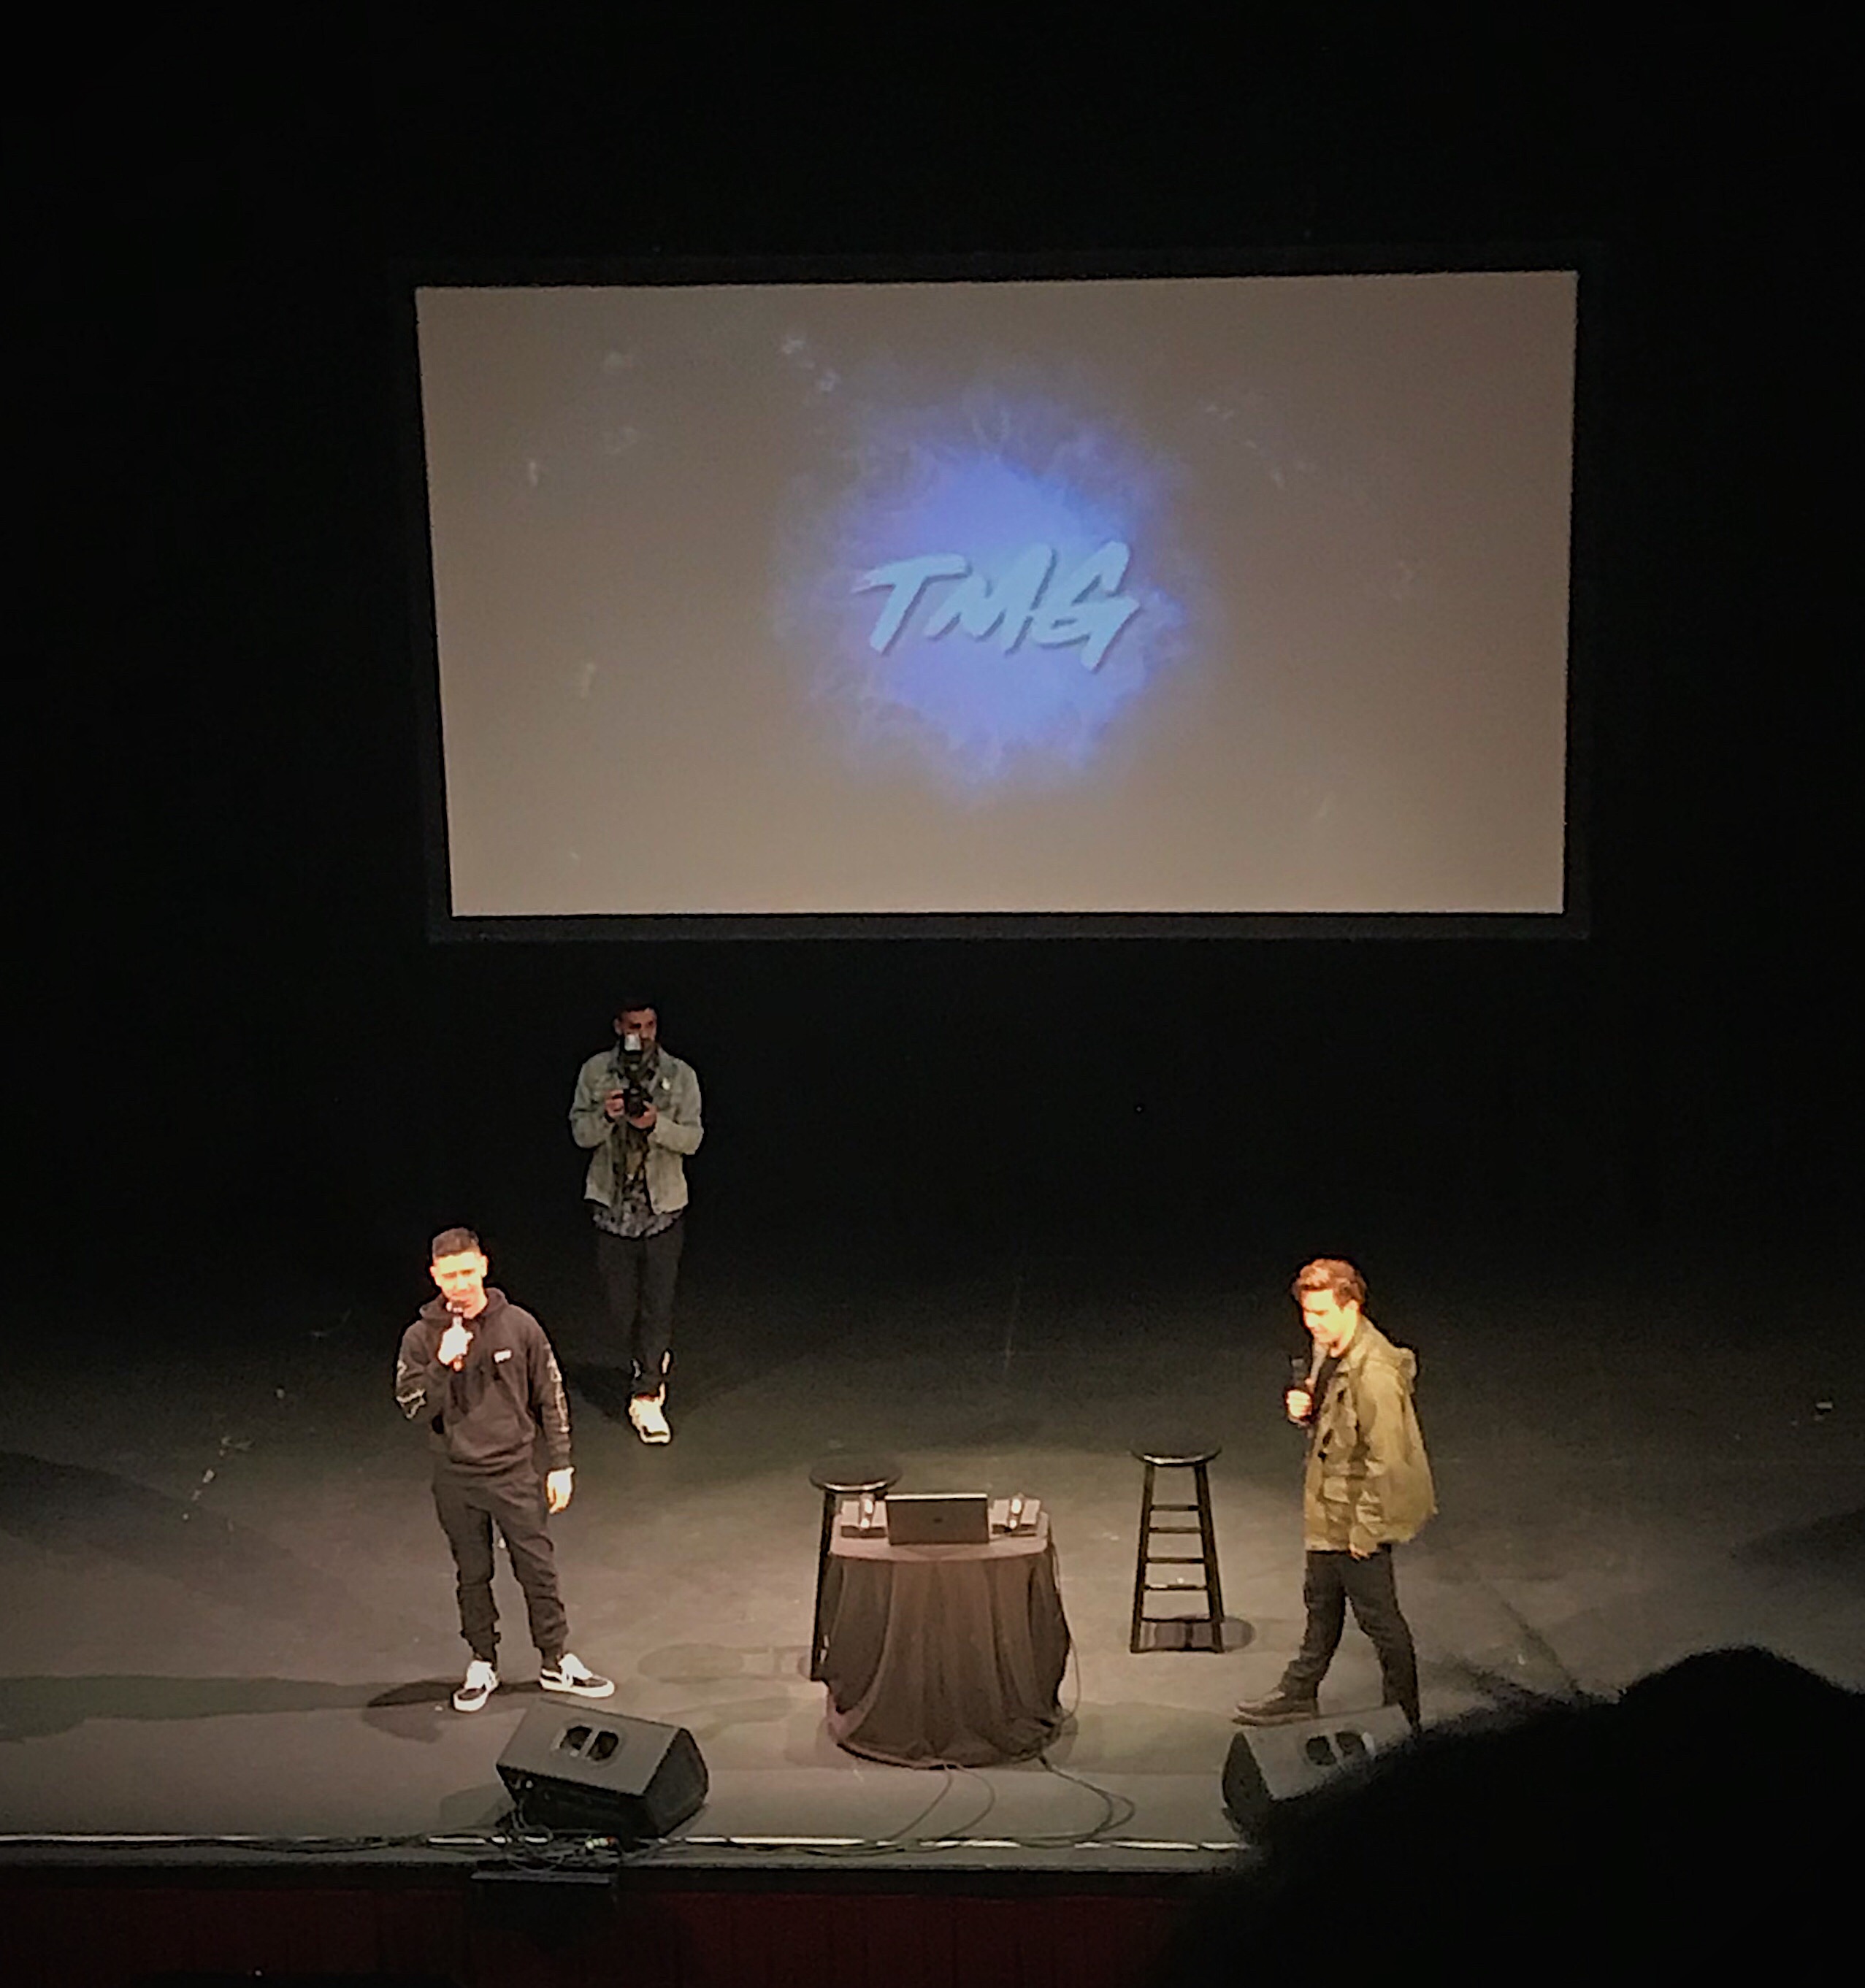 Noel Miller stands left of Cody Ko on a theater stage. They are both spotlighted by overhead lights. A projector screen above them reads “TMG” on top of a tye-dye blue background.